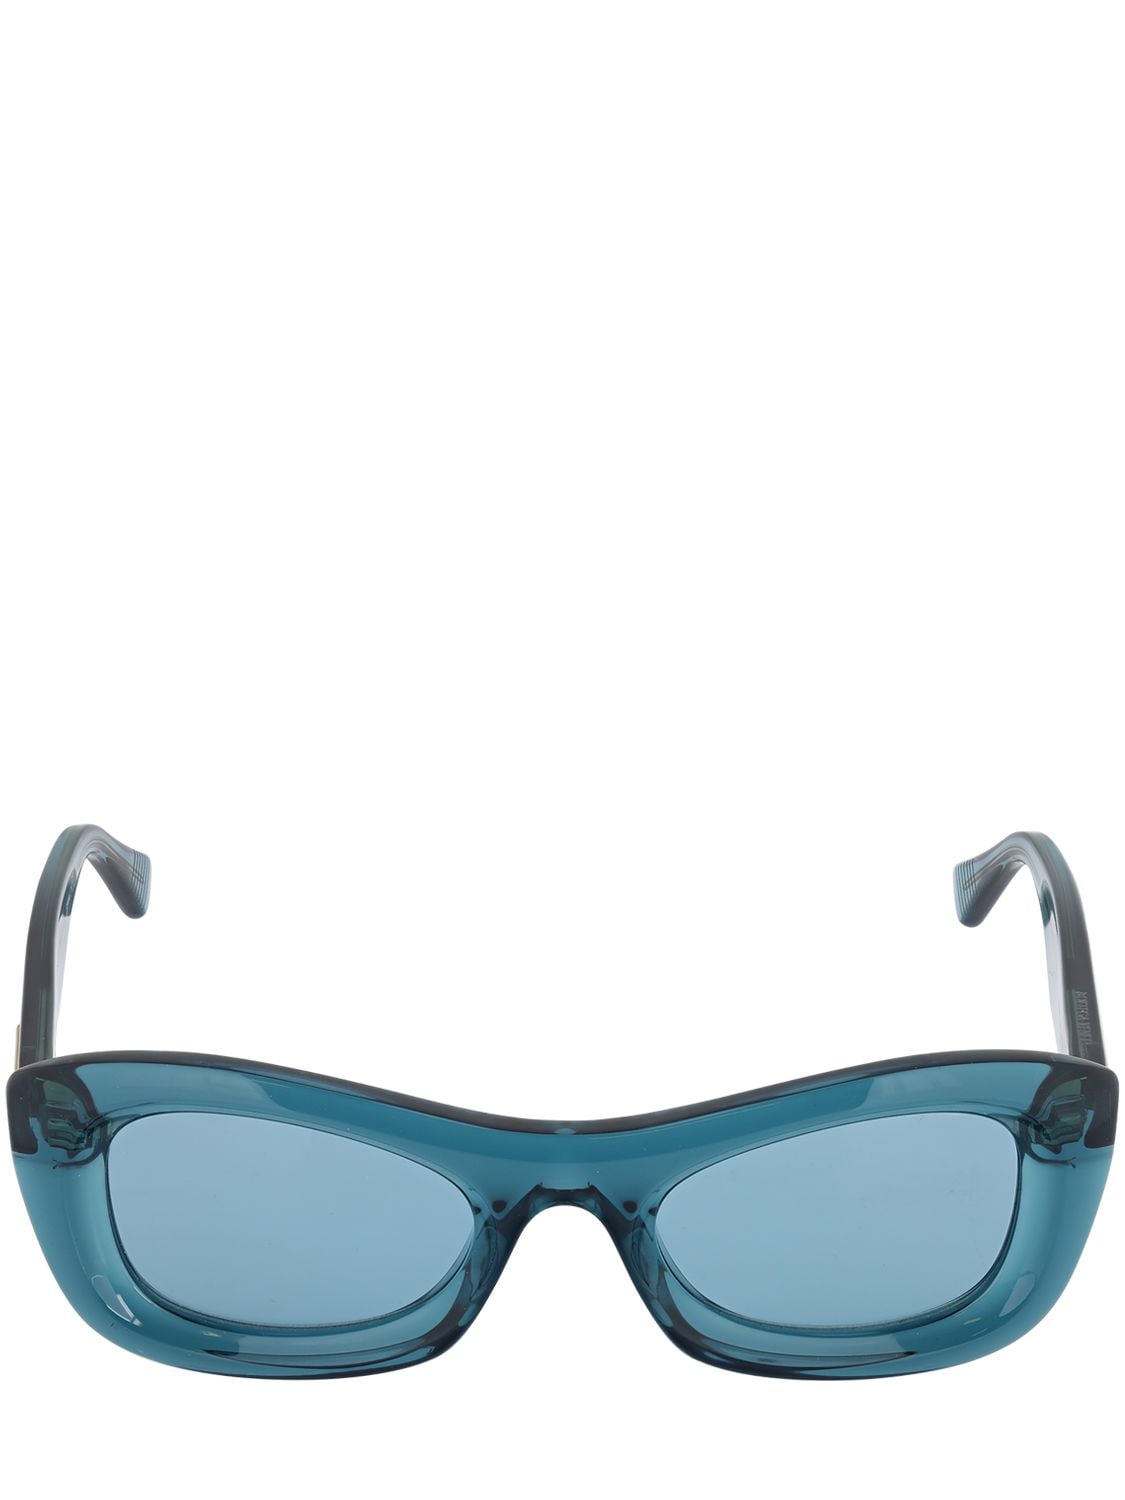 Bv1088s Rounded Acetate Sunglasses